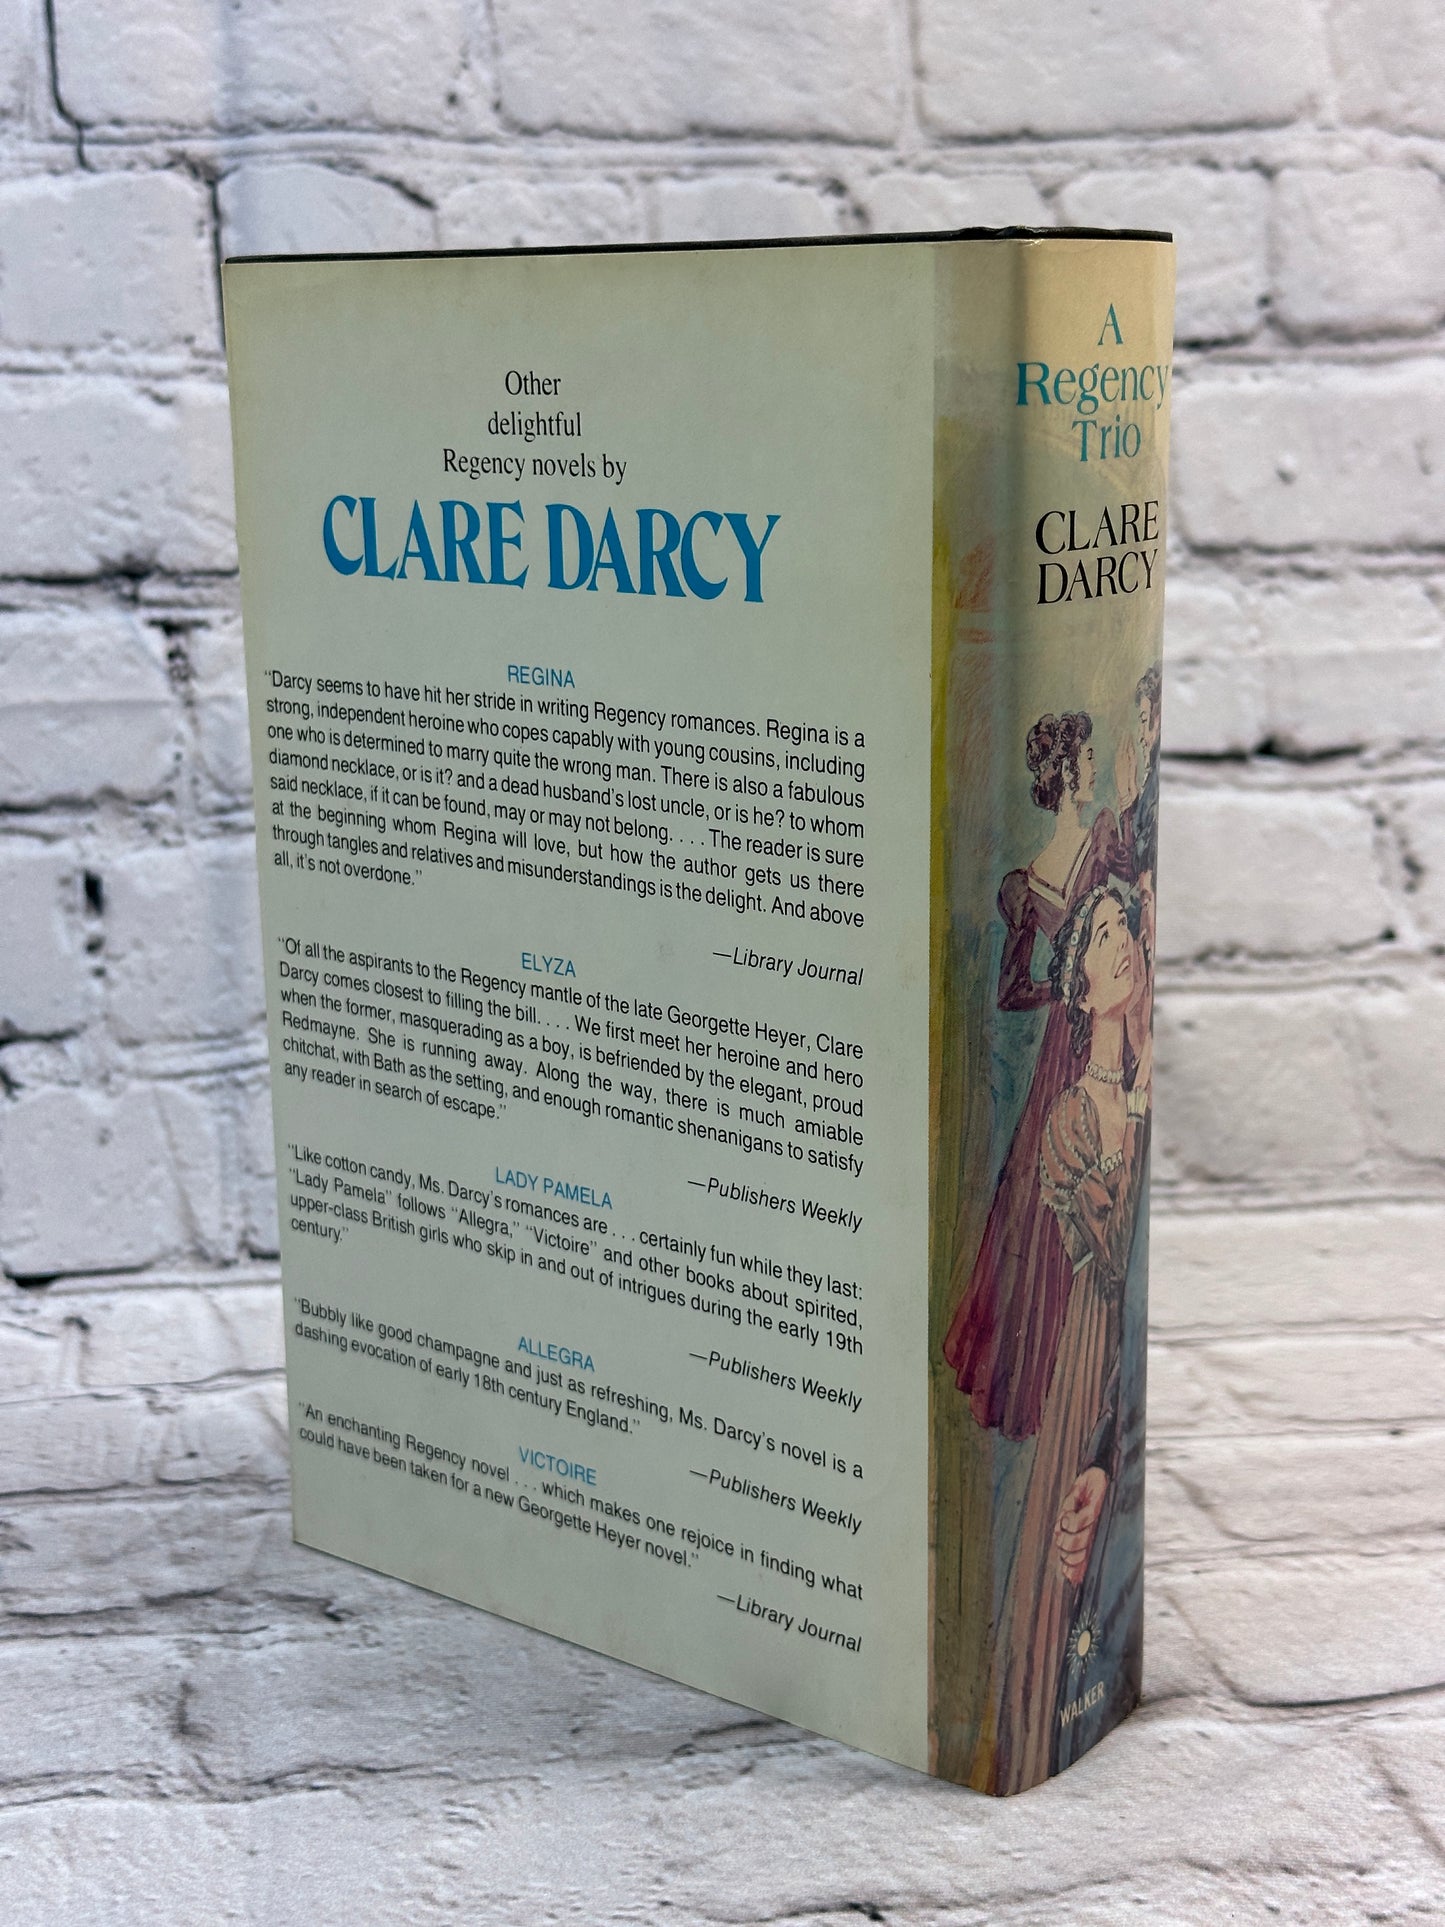 A Regency Trio by Clare Darcy [3 Romantic Novels In 1 · BCE · 1976]